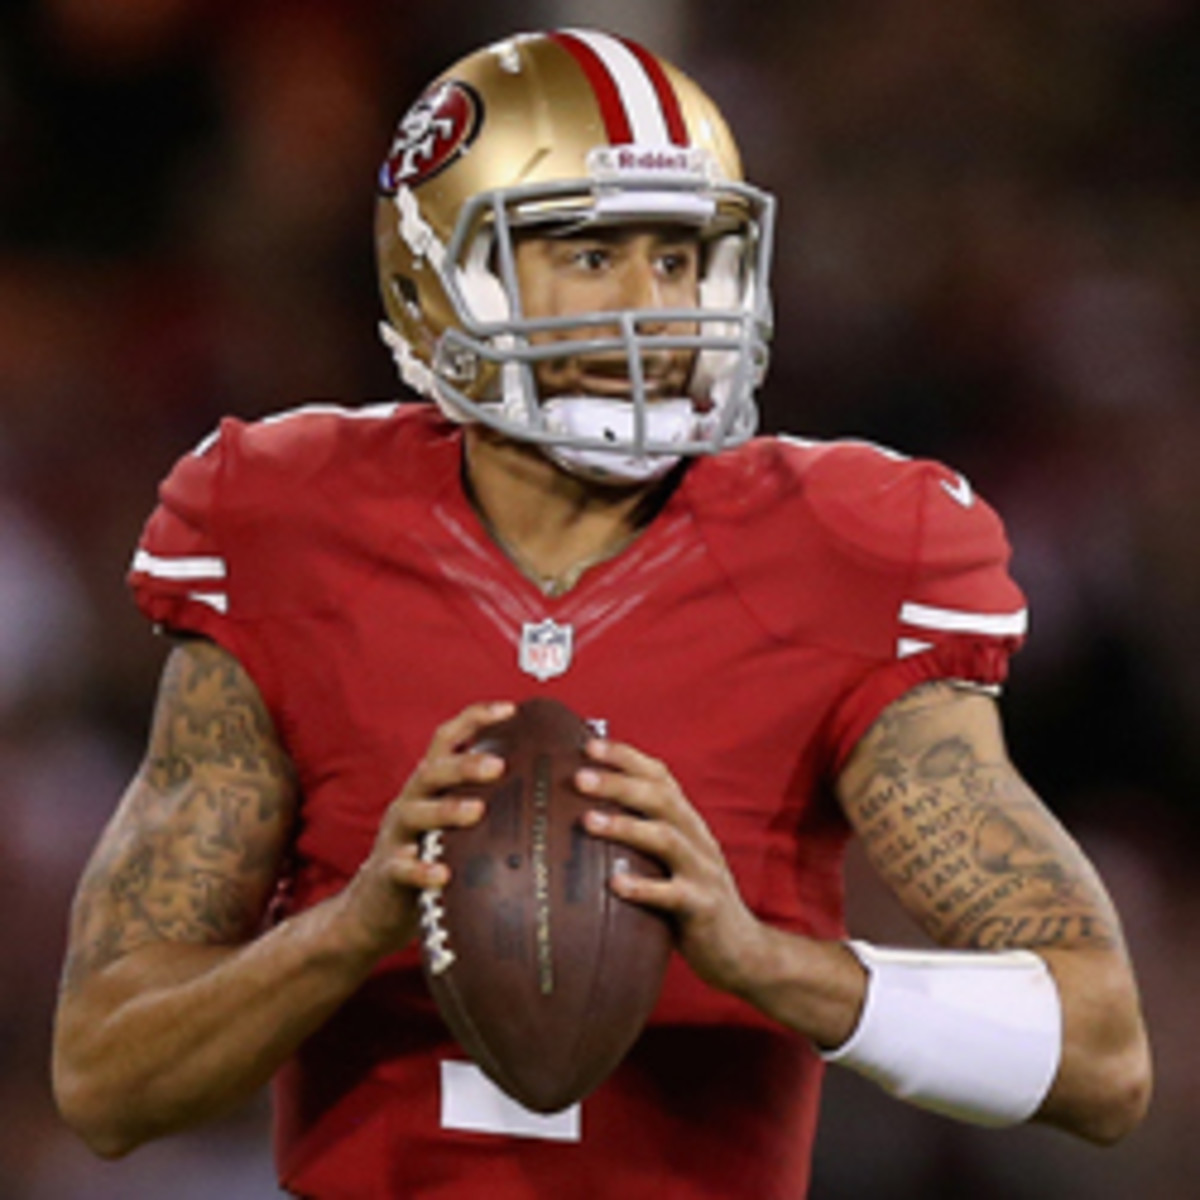 Colin Kaepernick's tattoos include Bible verses. (Ezra Shaw/Getty Images)